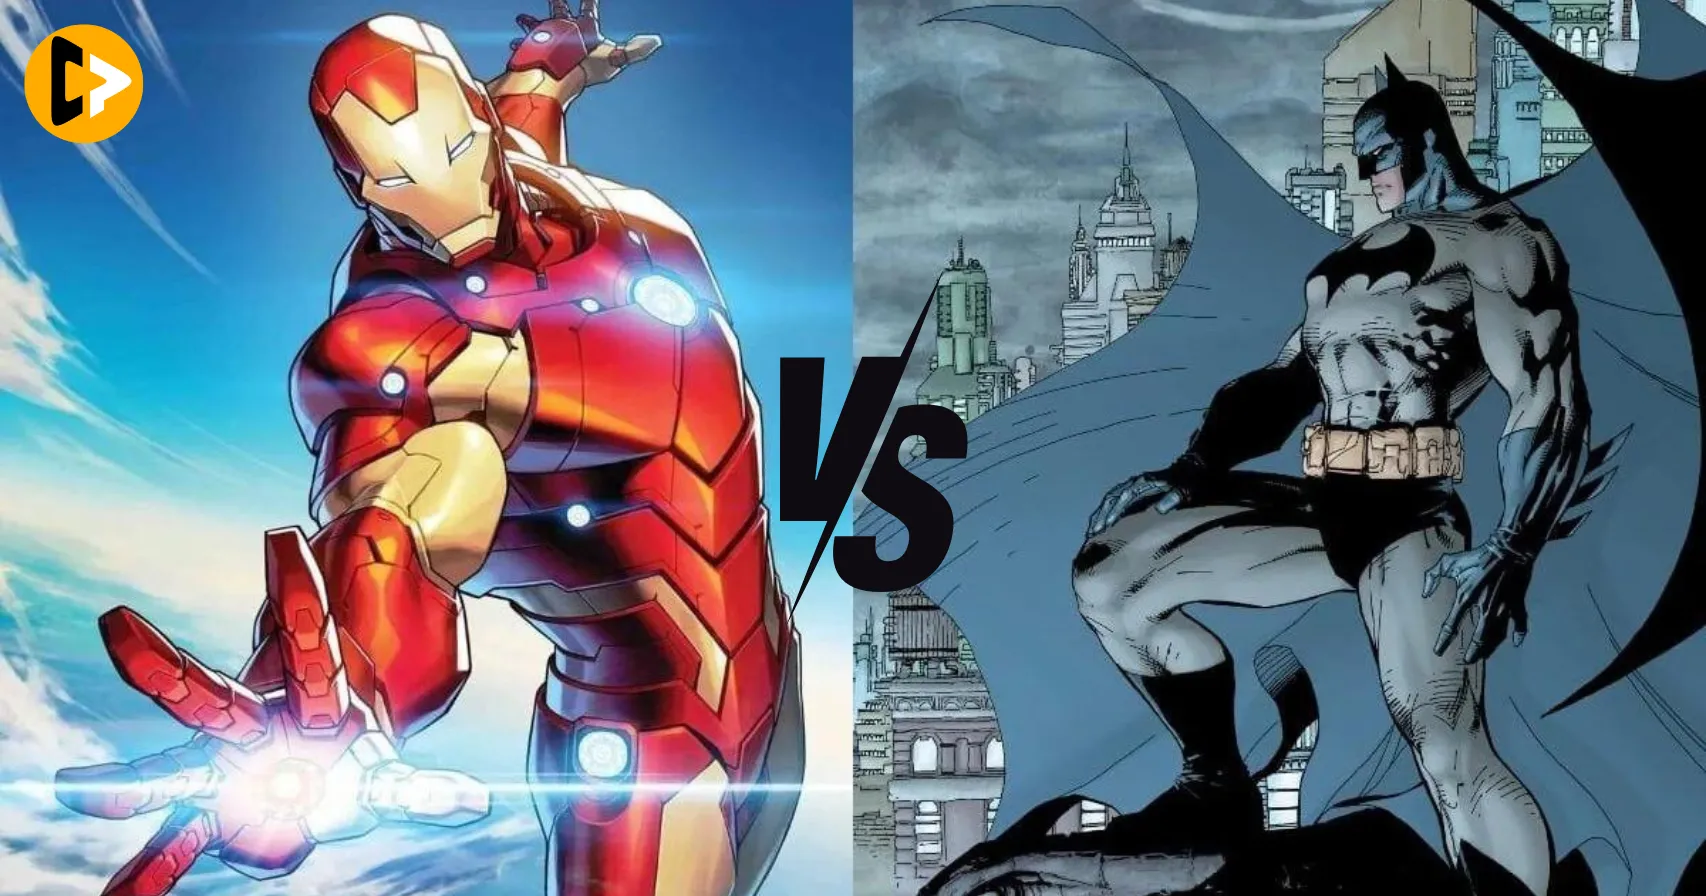 Who would win in a fight between Iron Man and Batman